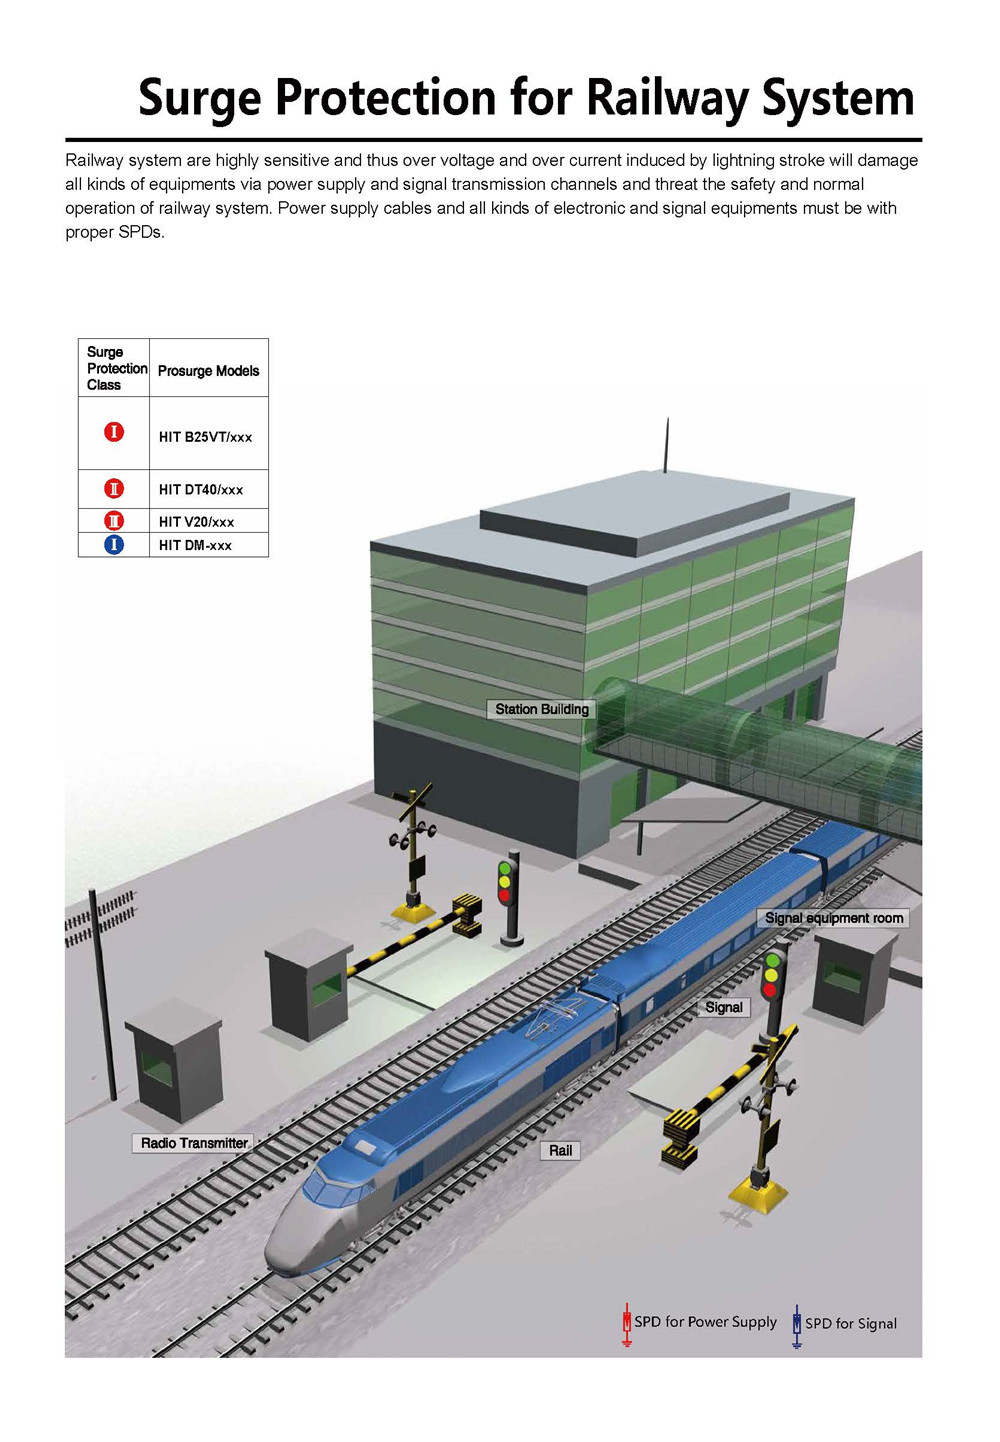 Surge Protection Solution for Railway System - Prosurge-single page.jpg